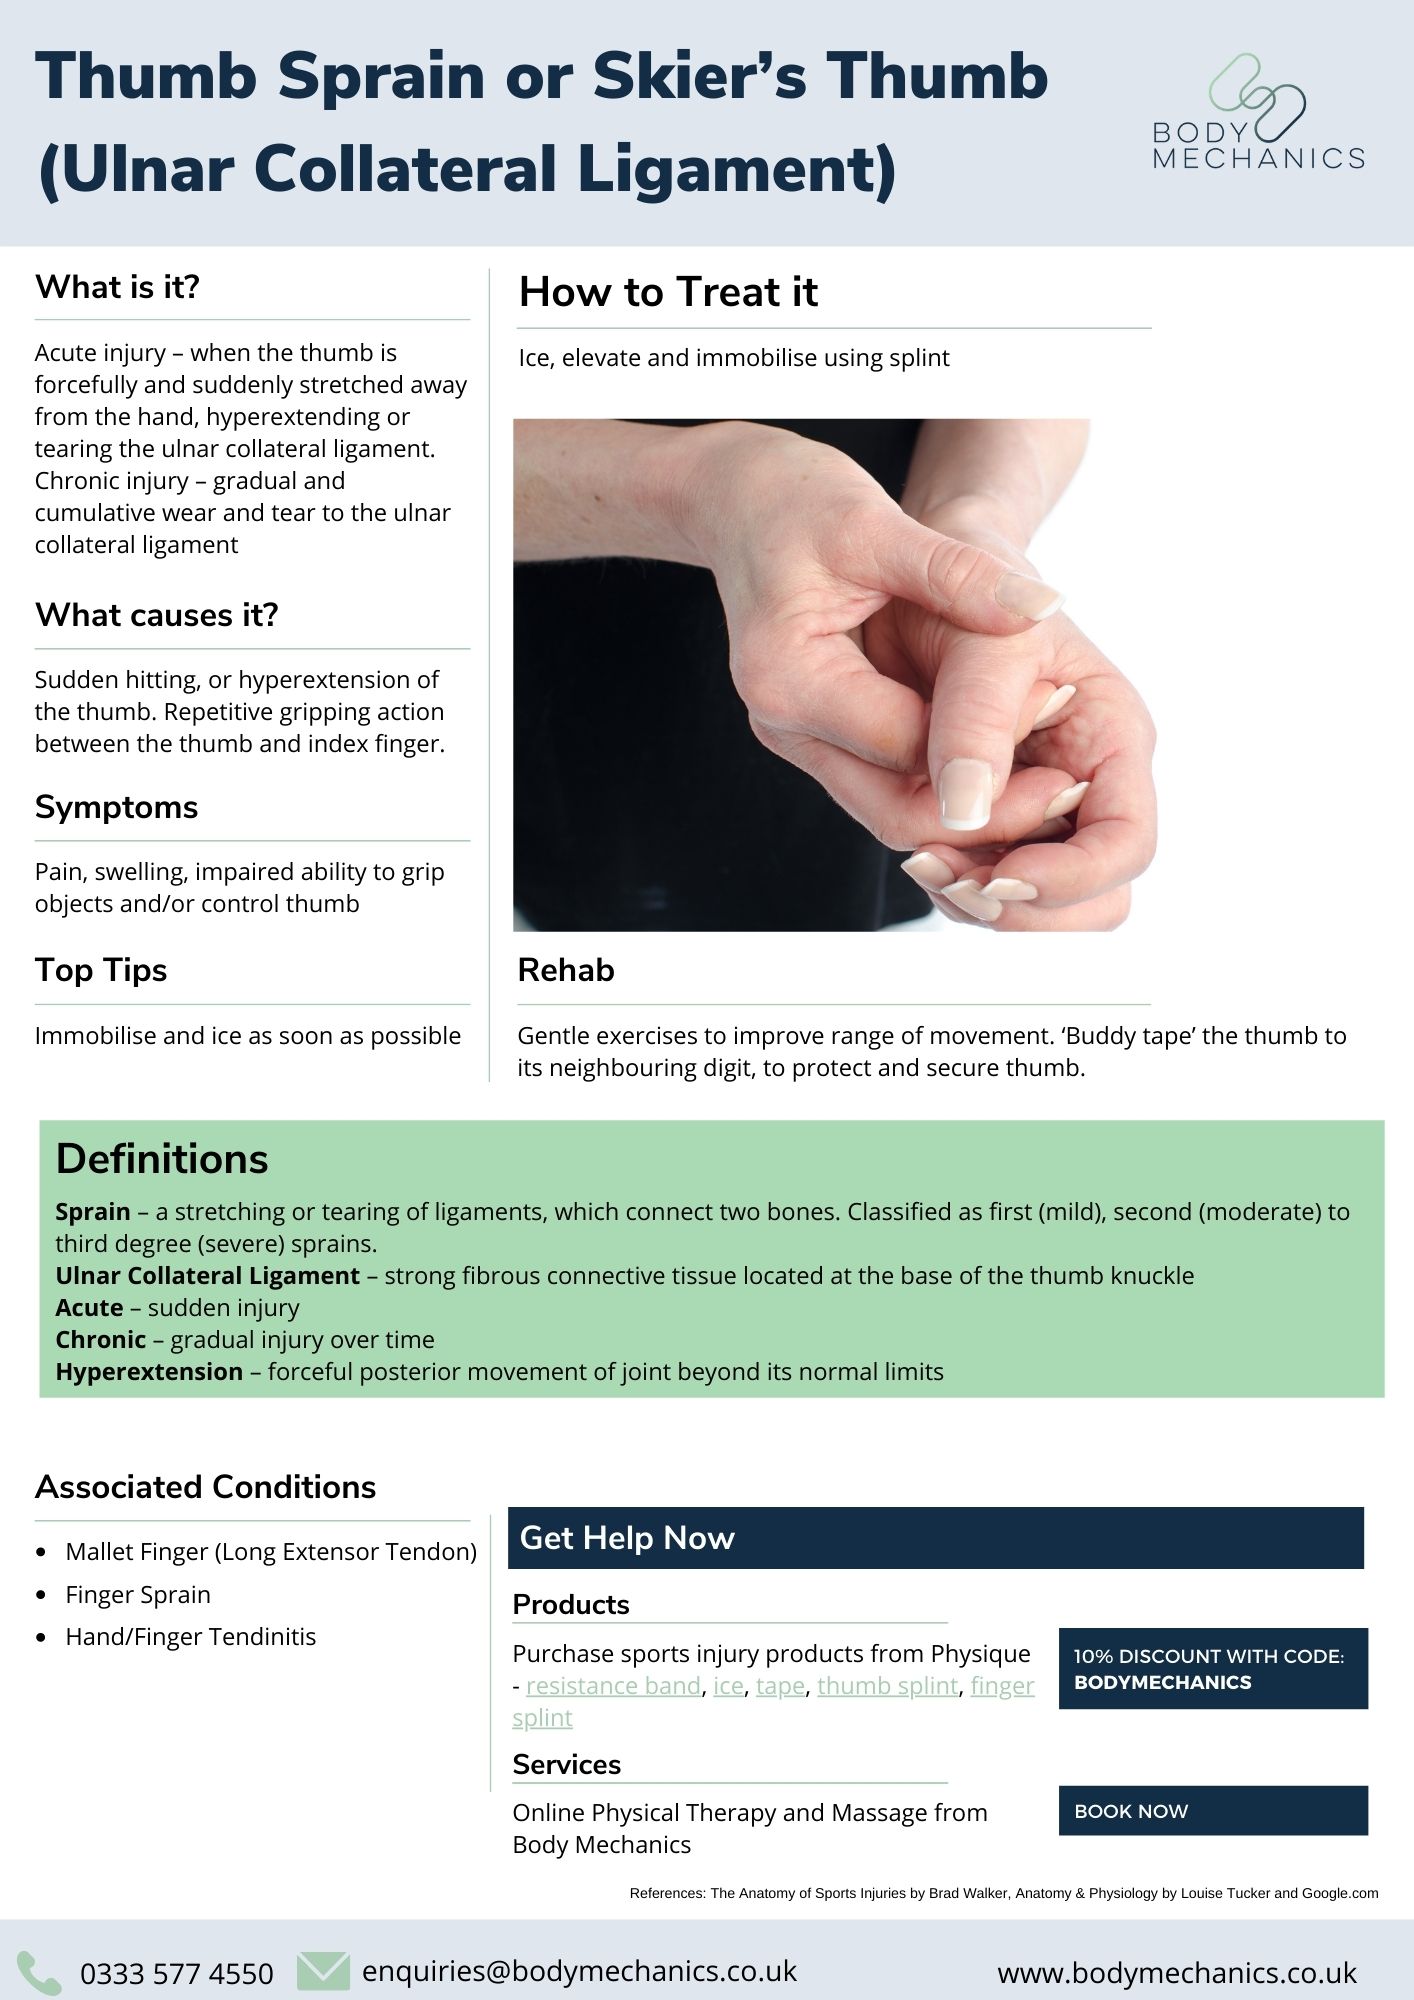 Thumb Sprain or Skier’s Thumb (Ulnar Collateral Ligament Infoguide